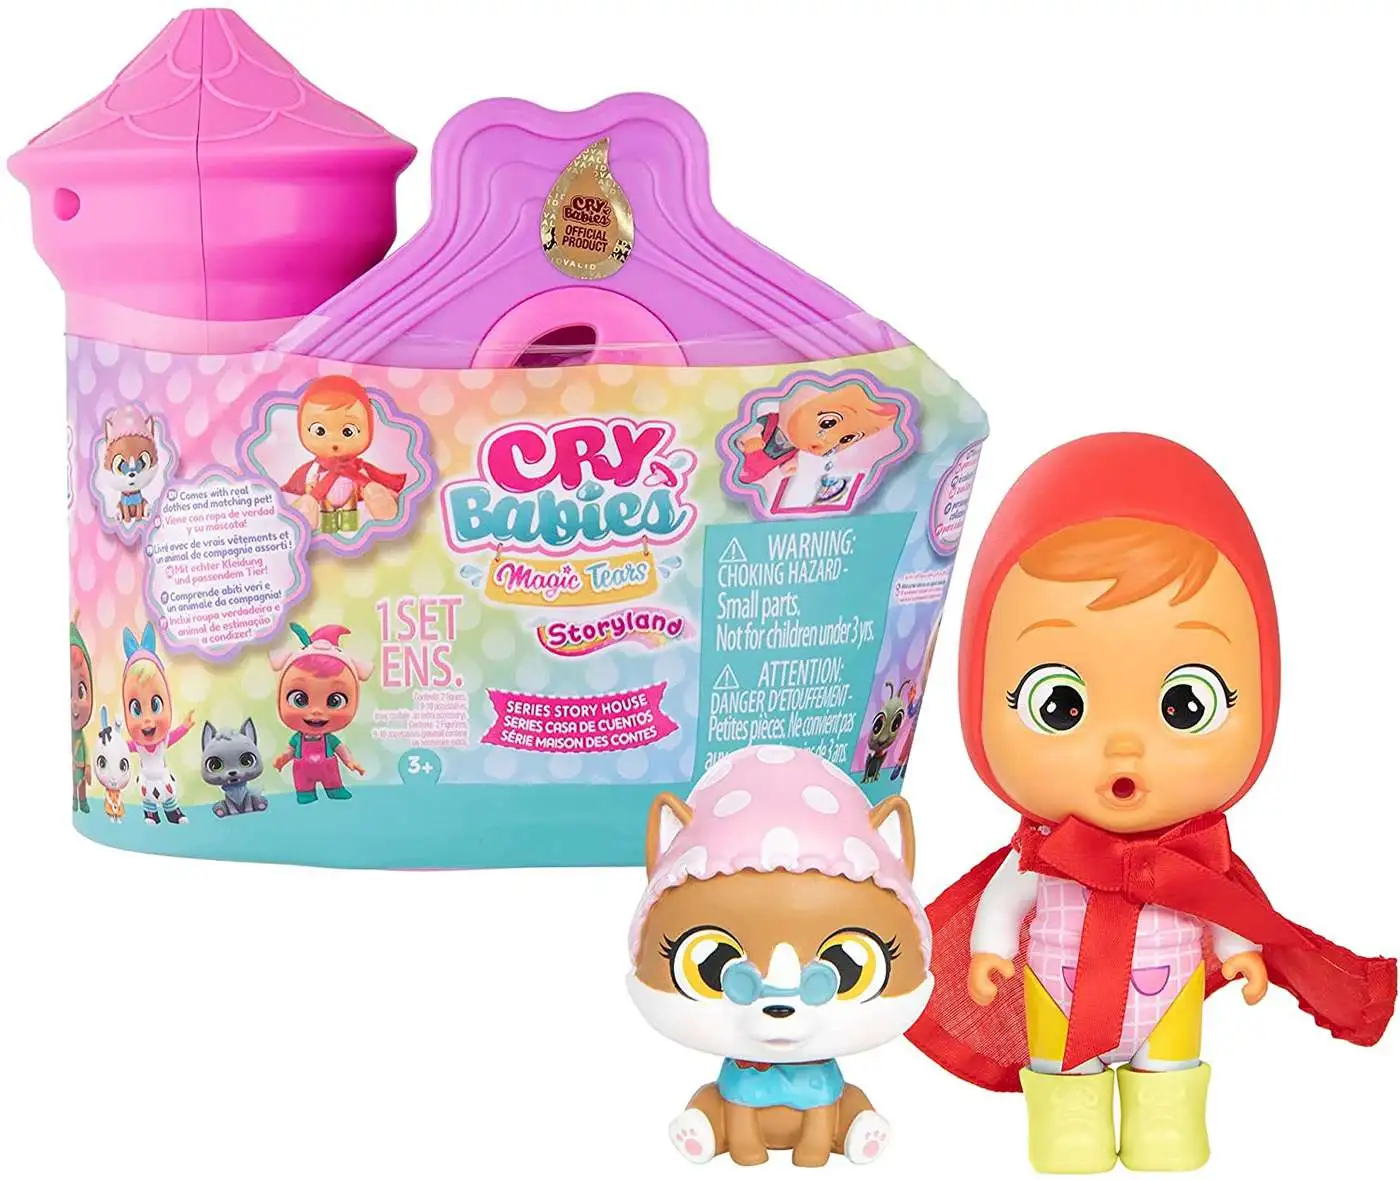 1 x CRY BABIES MAGIC TEARS BLIND CAPSULE DOLL SERIES 1 GREEN BRAND NEW & SEALED 